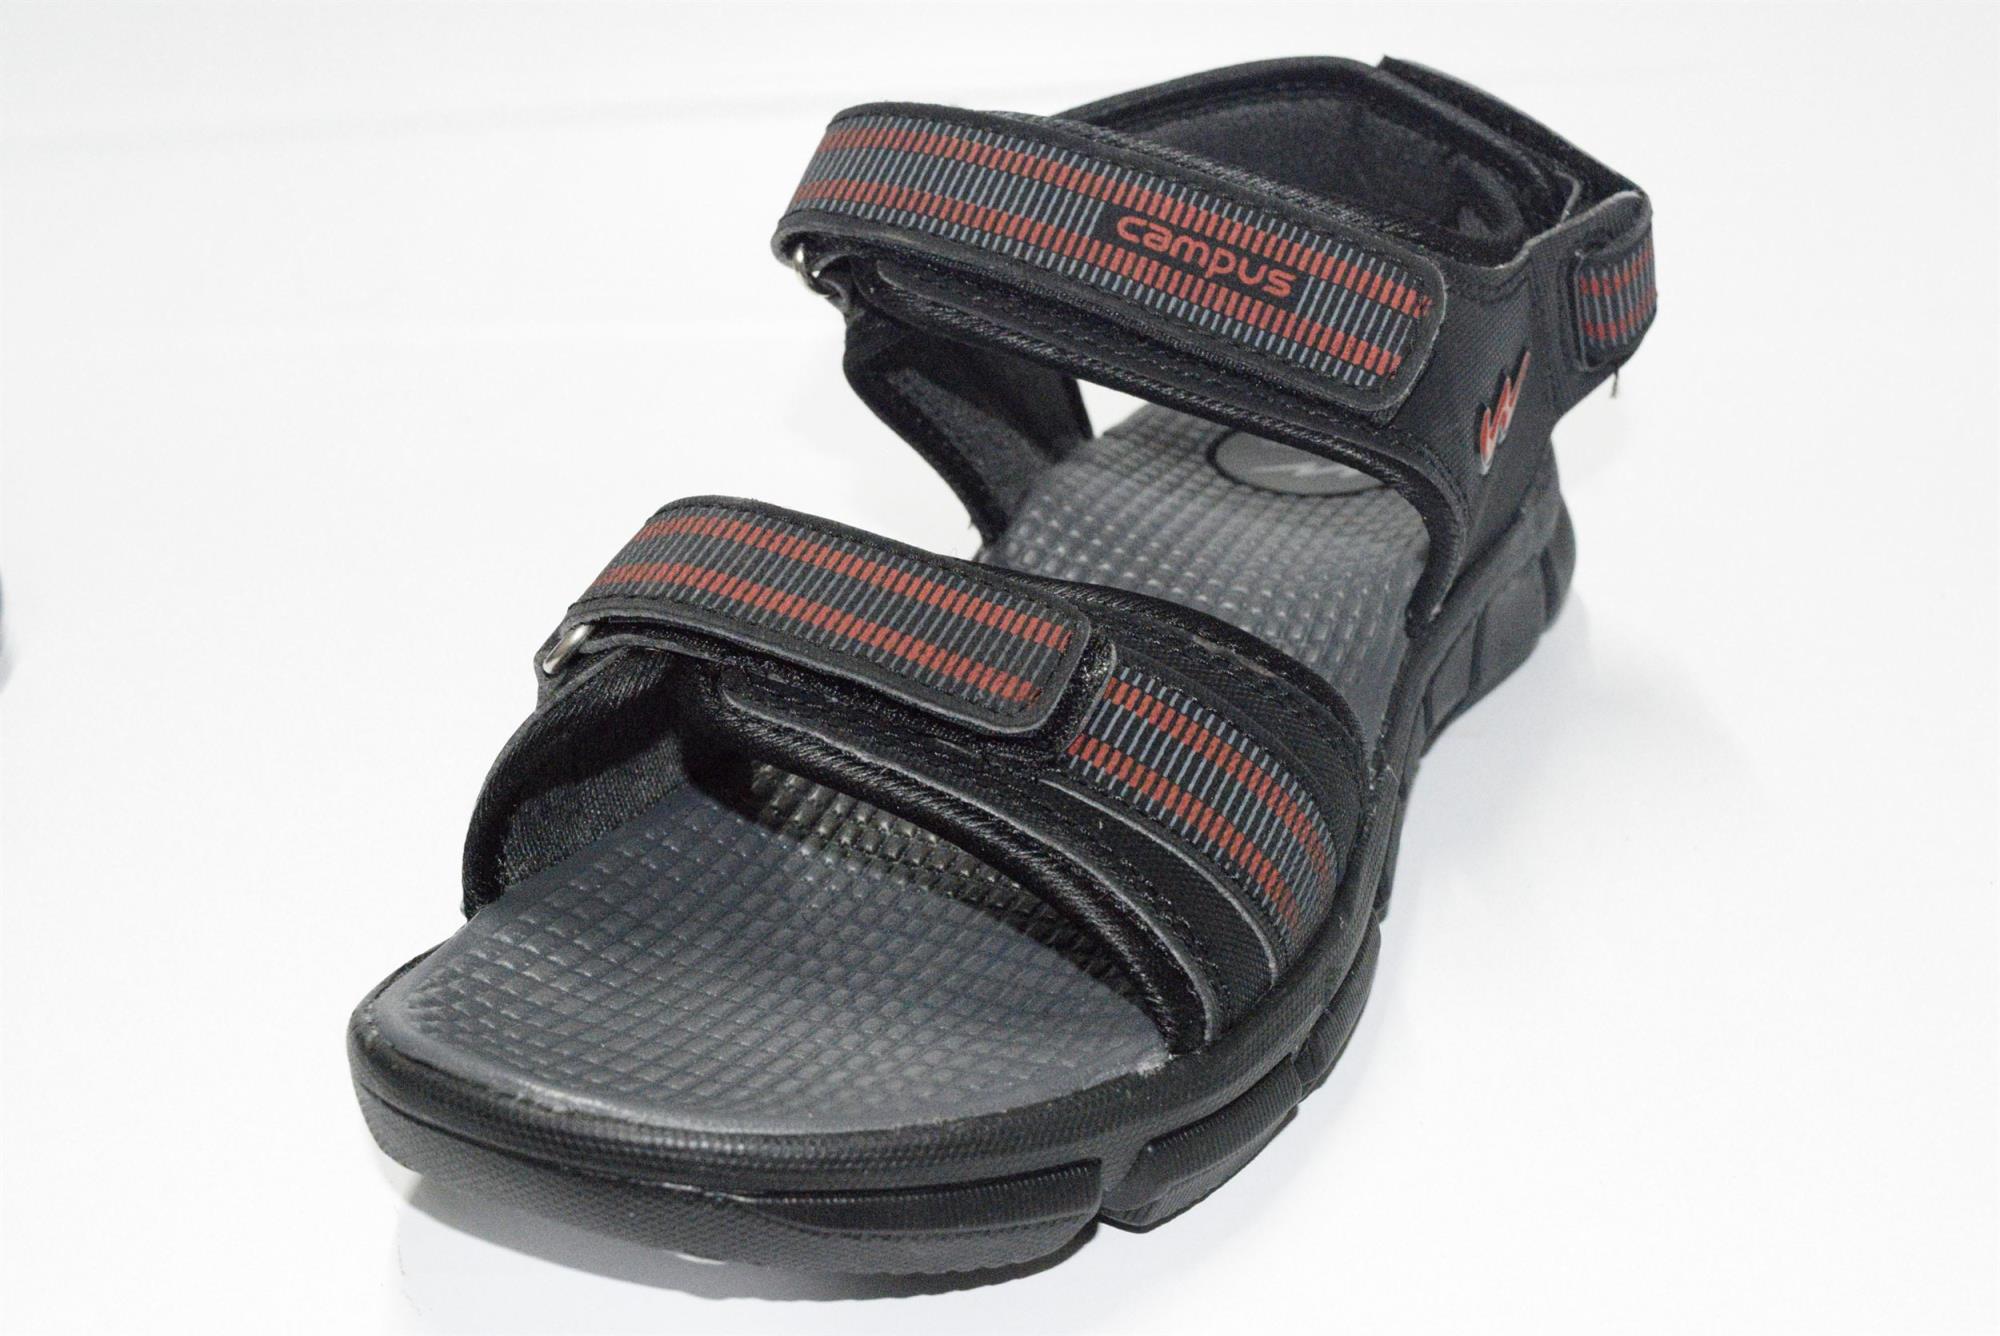 campus sandal latest list in 219